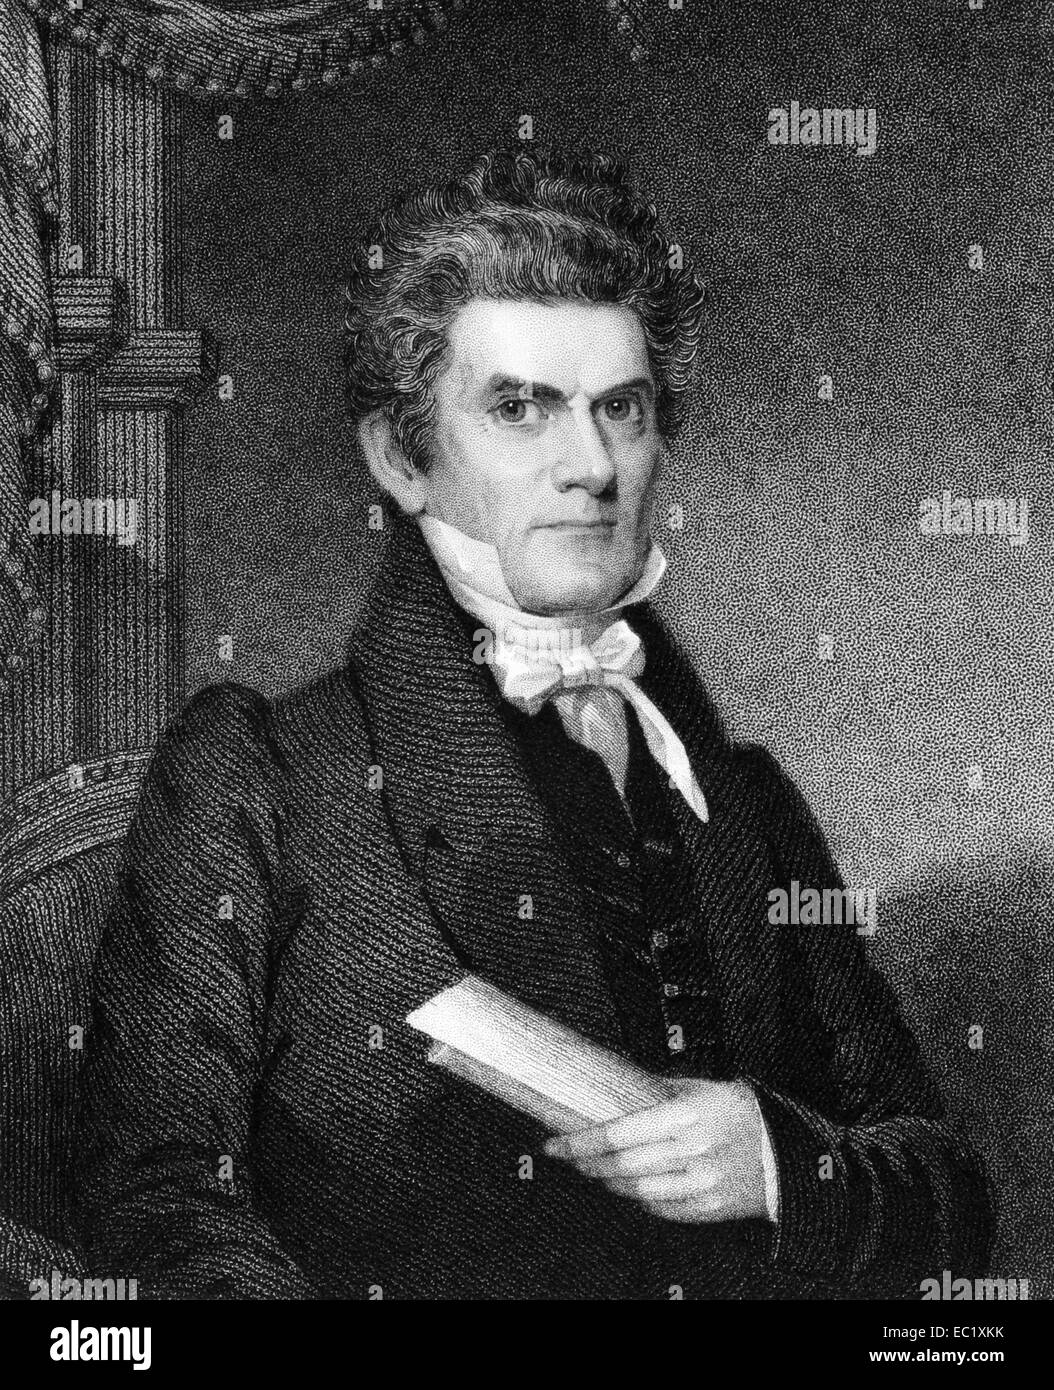 John Caldwell Calhoun (1782-1850) on engraving from 1835. United States politician and political theorist. Stock Photo